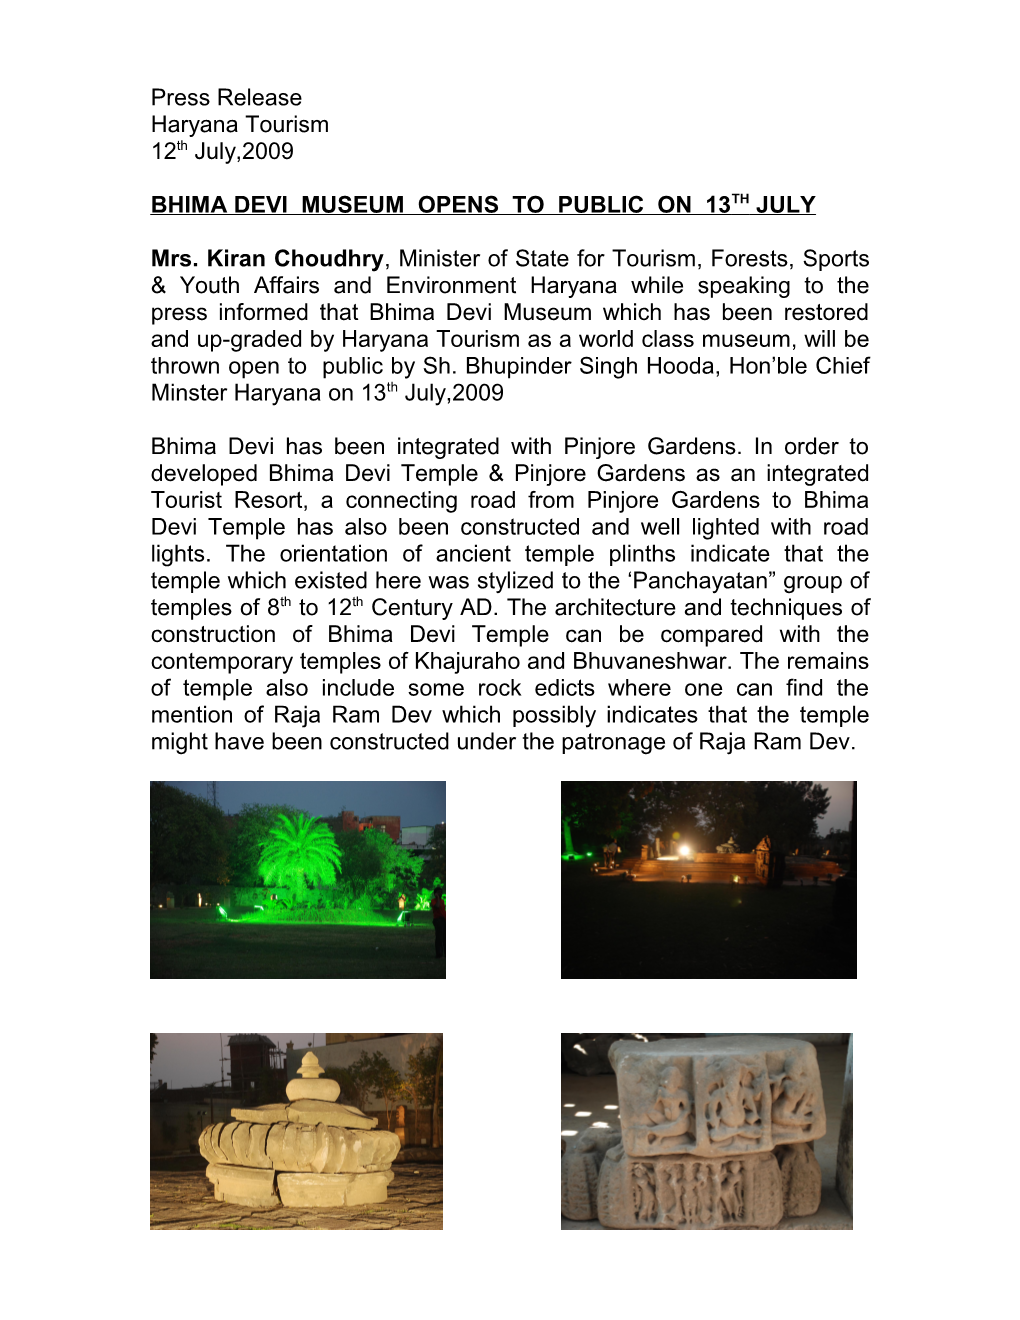 Bhima Devi Museum Opens to Public on 13Th July